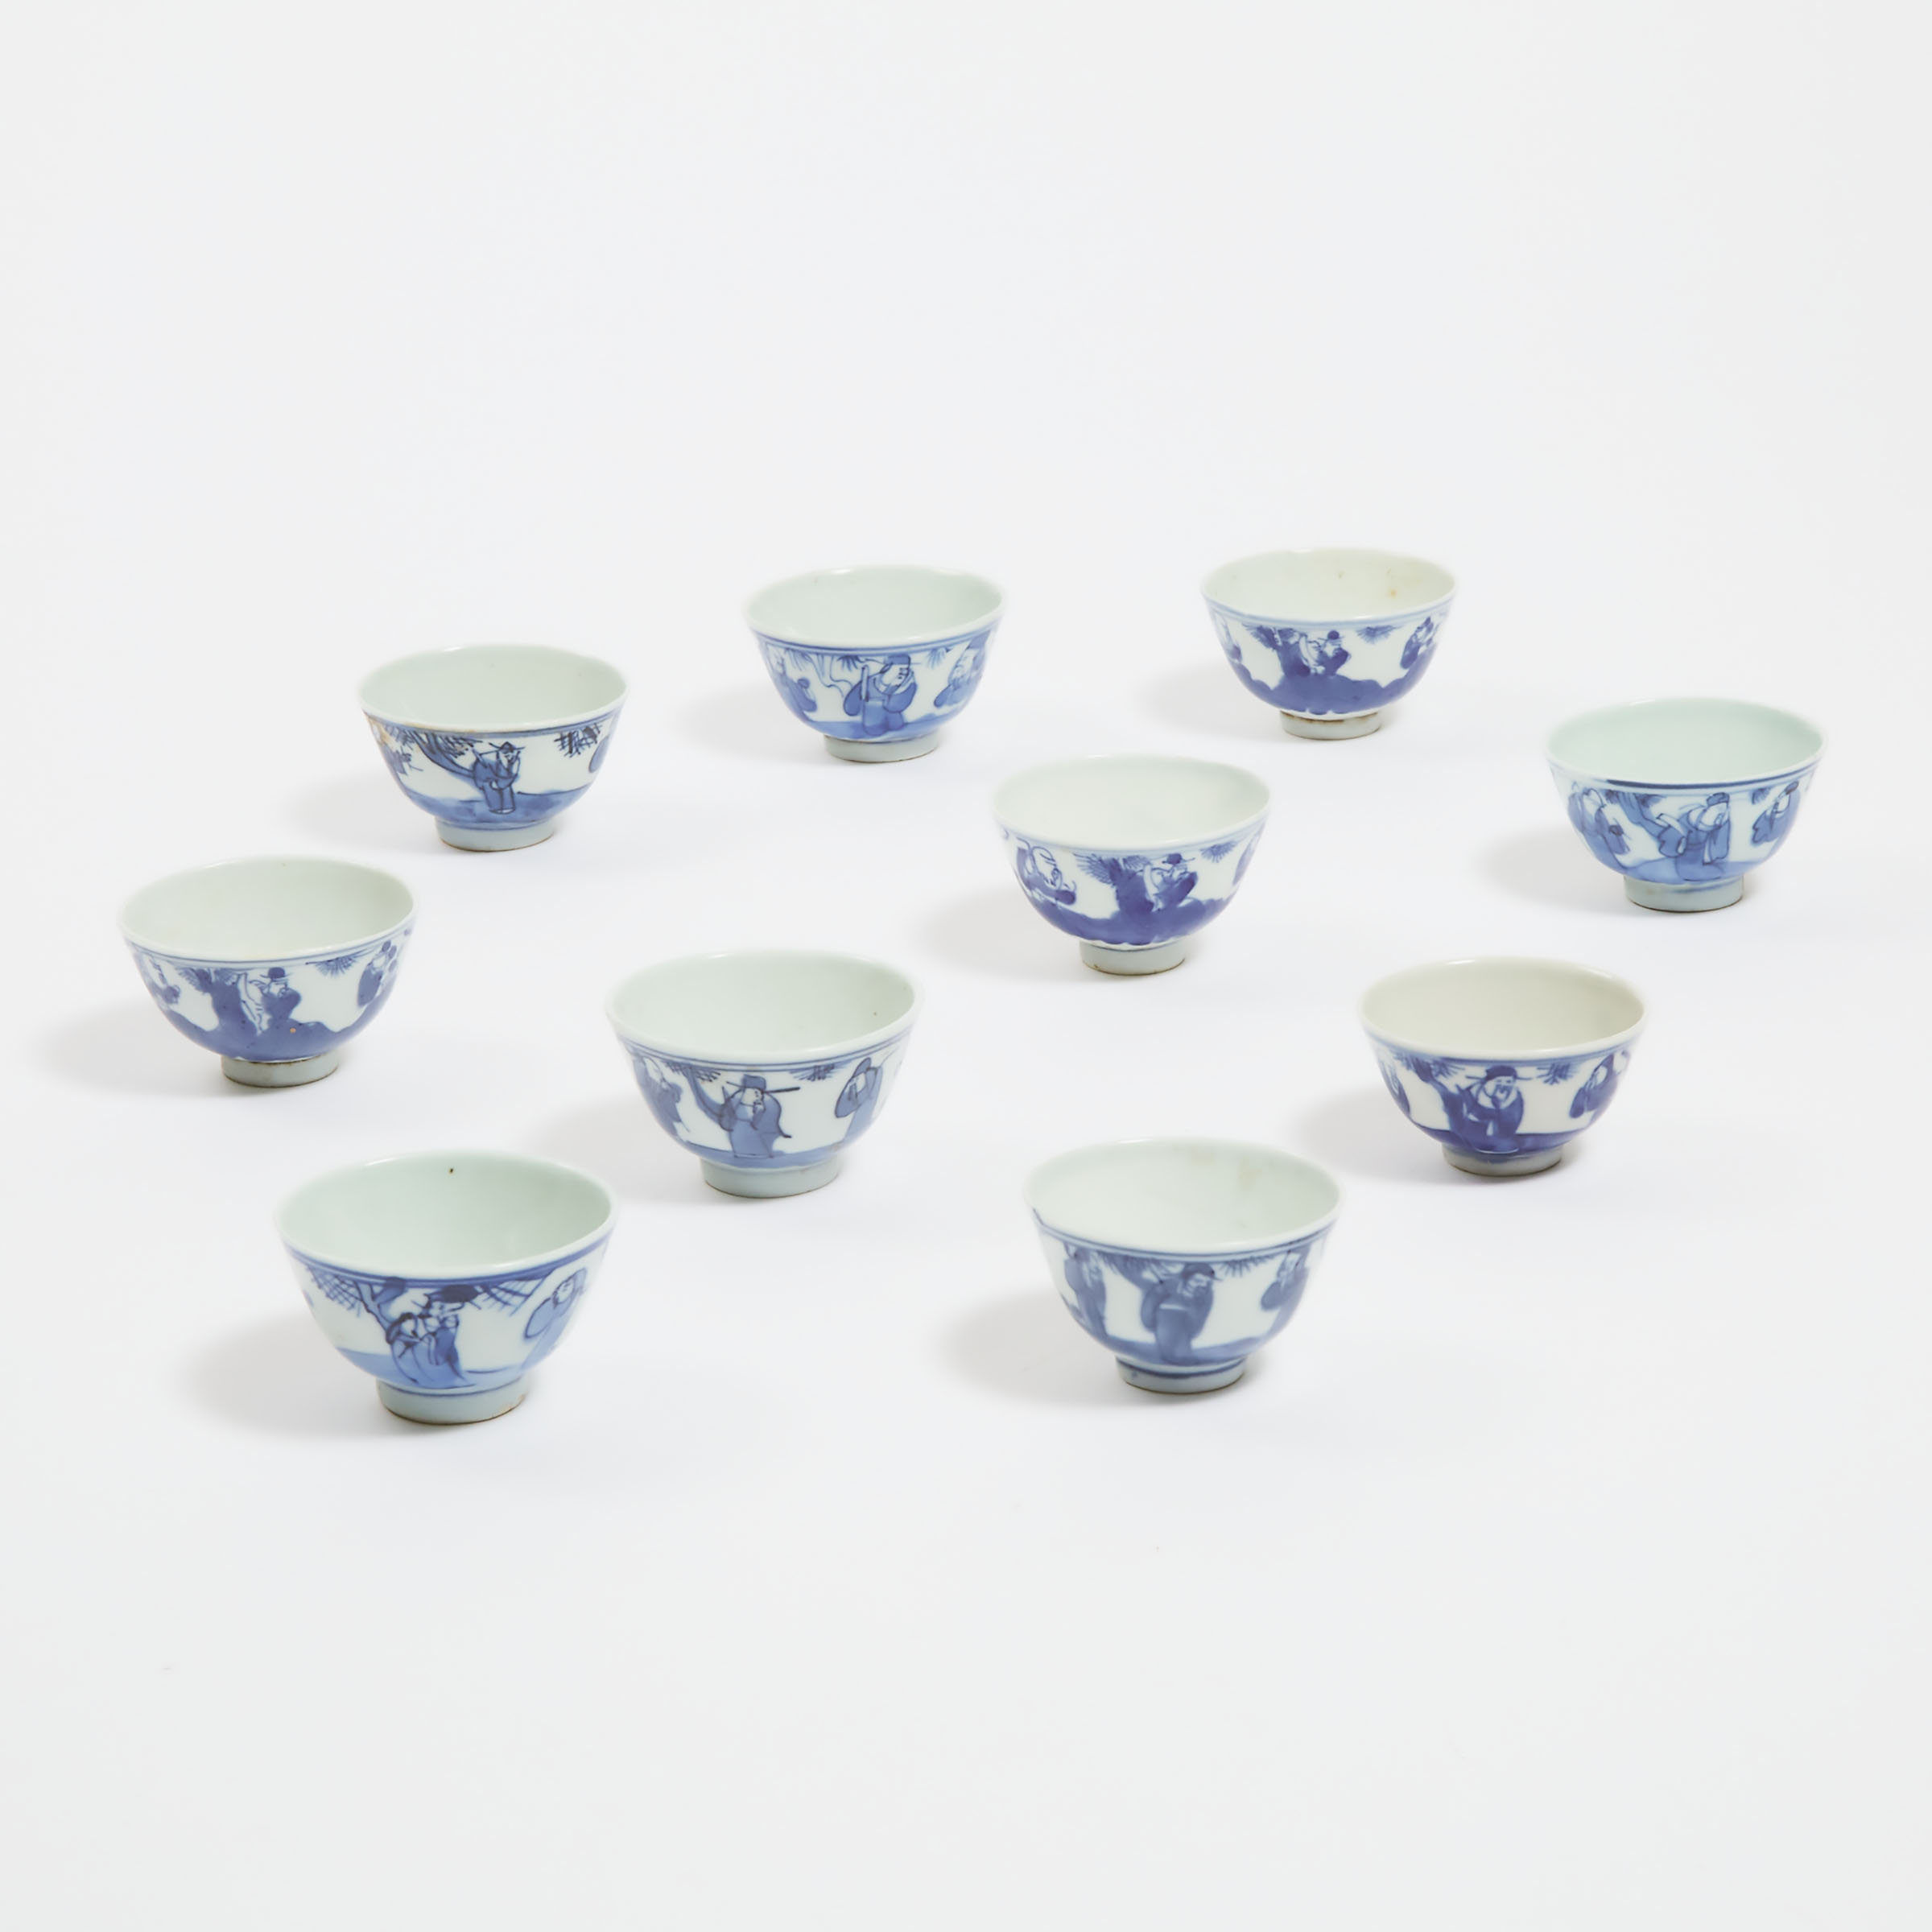 A Group of Ten Blue and White 'Fu Lu Shou' Cups, 19th Century